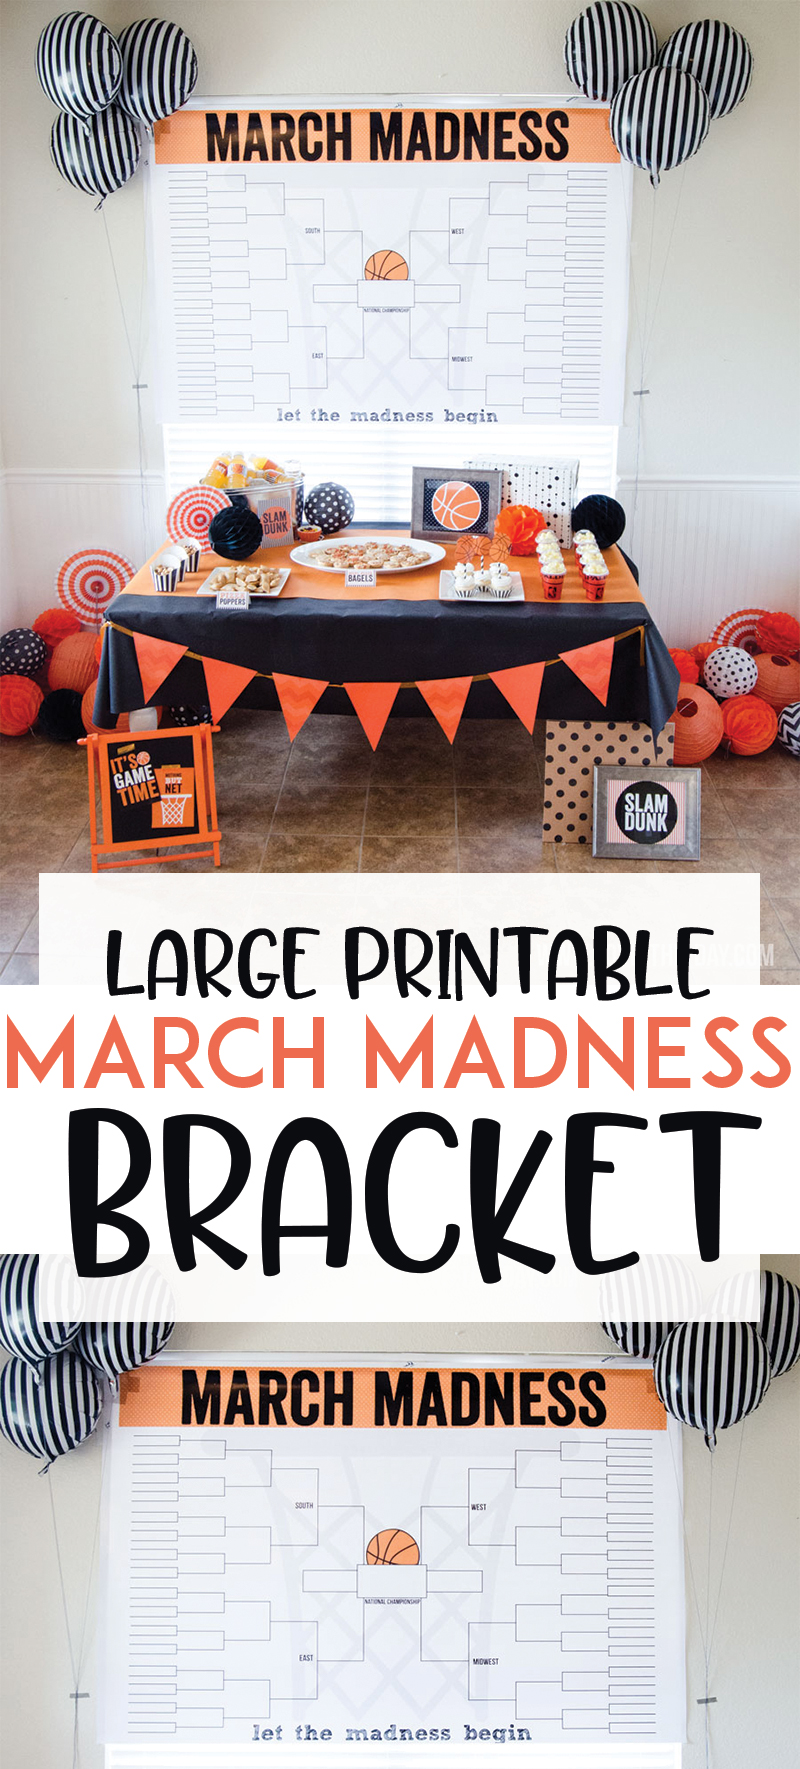 2018 March Madness Bracket Printable by Lindi Haws of Love The Day